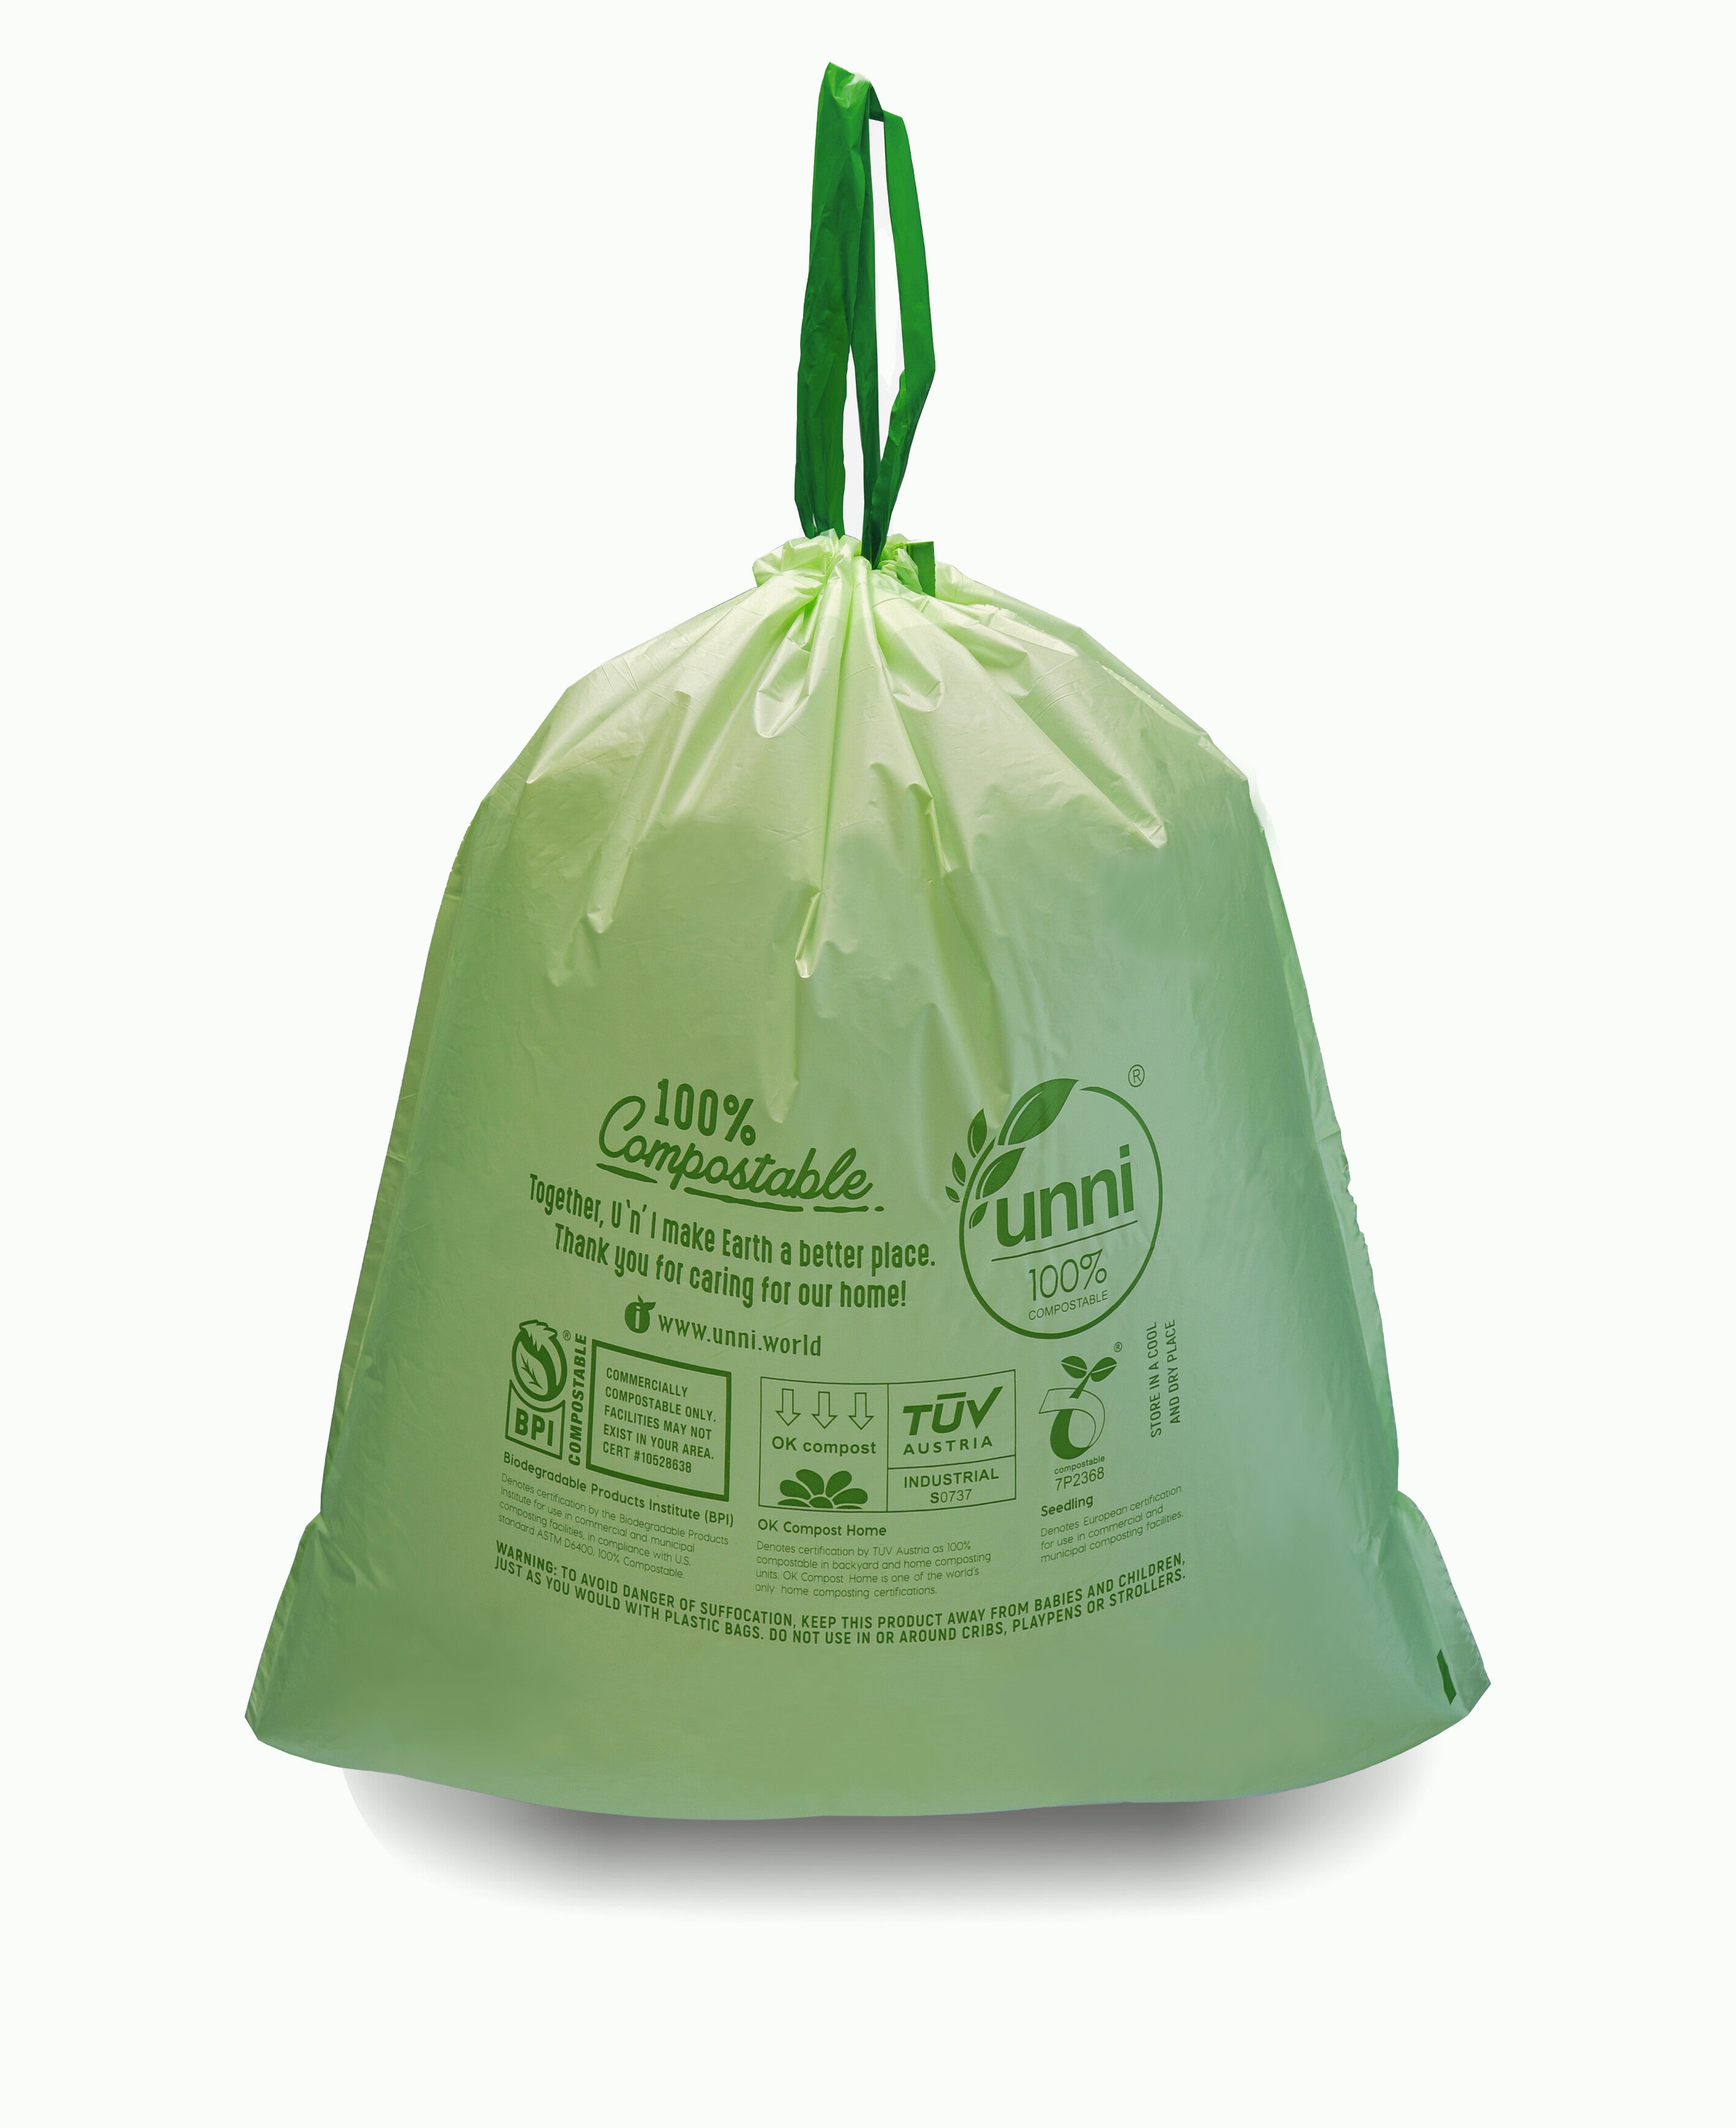 Compostable vs degradable and biodegradable bags